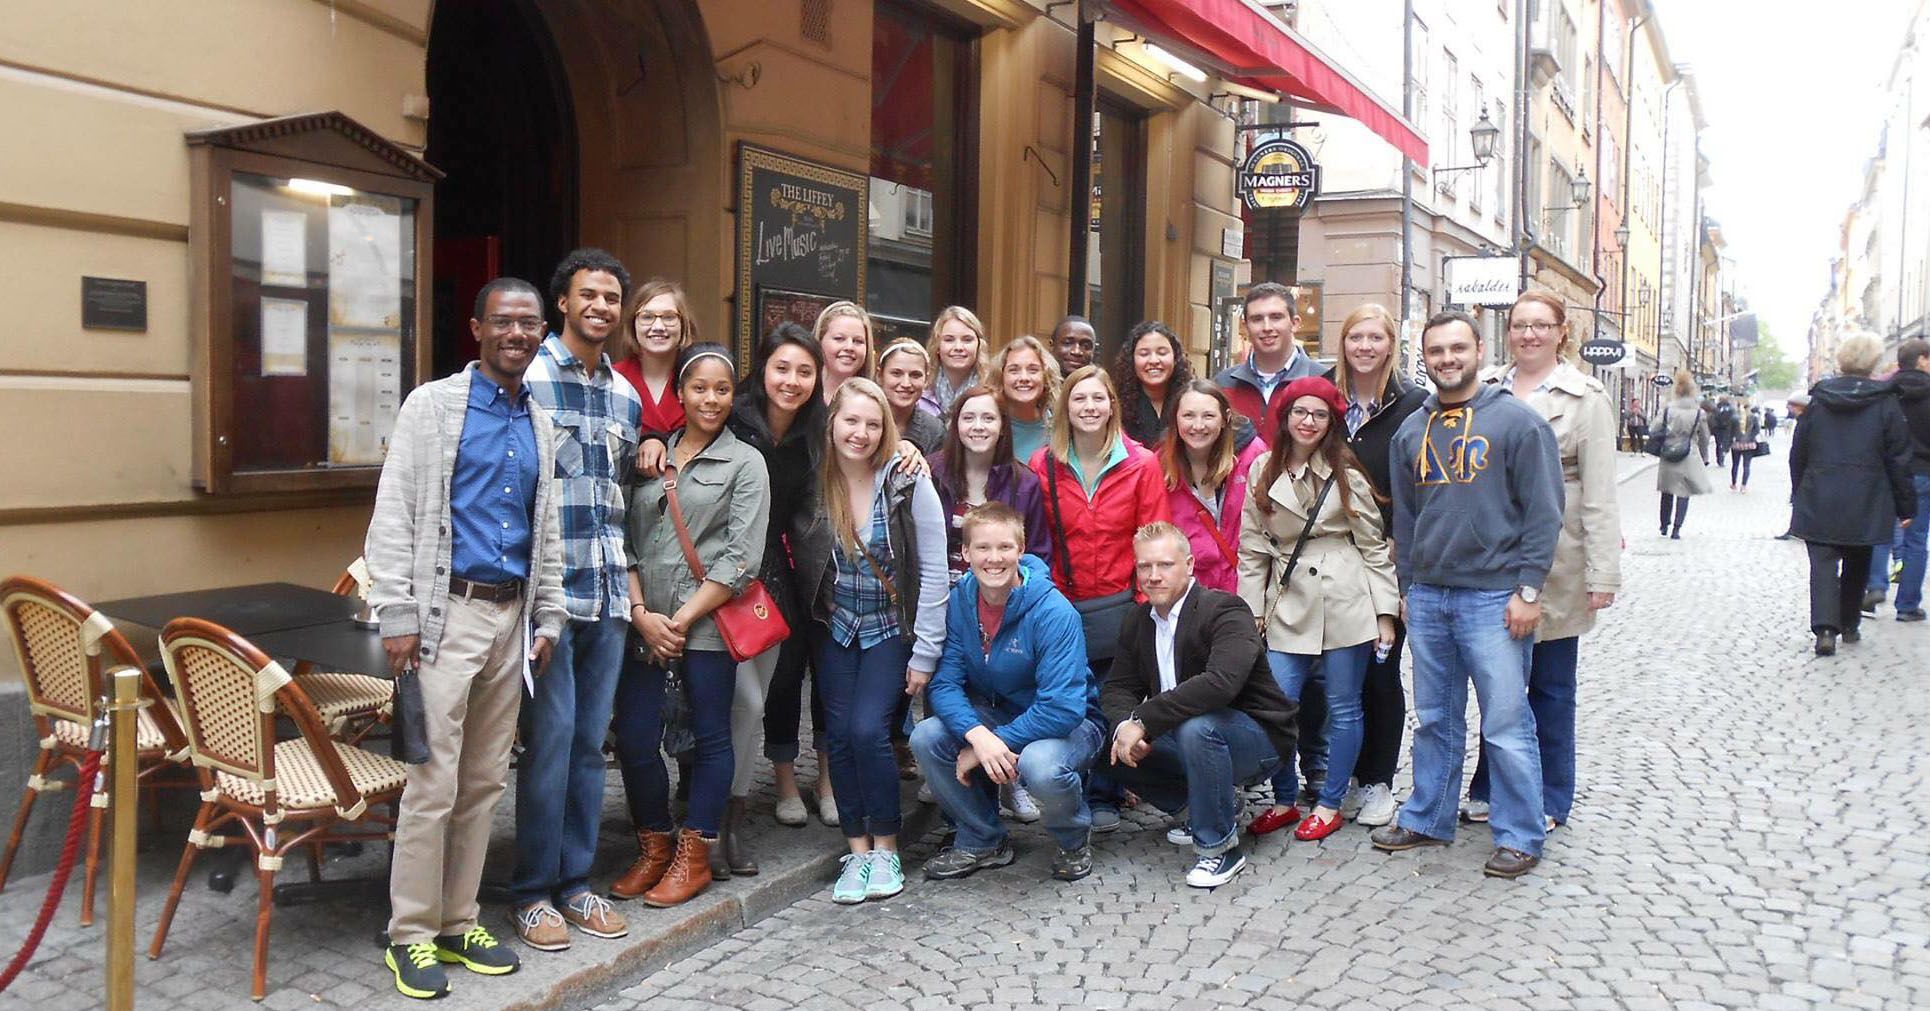 Students, Beatty and Winfrey gather in Stockholm's Old Town known as Gamla Stan.